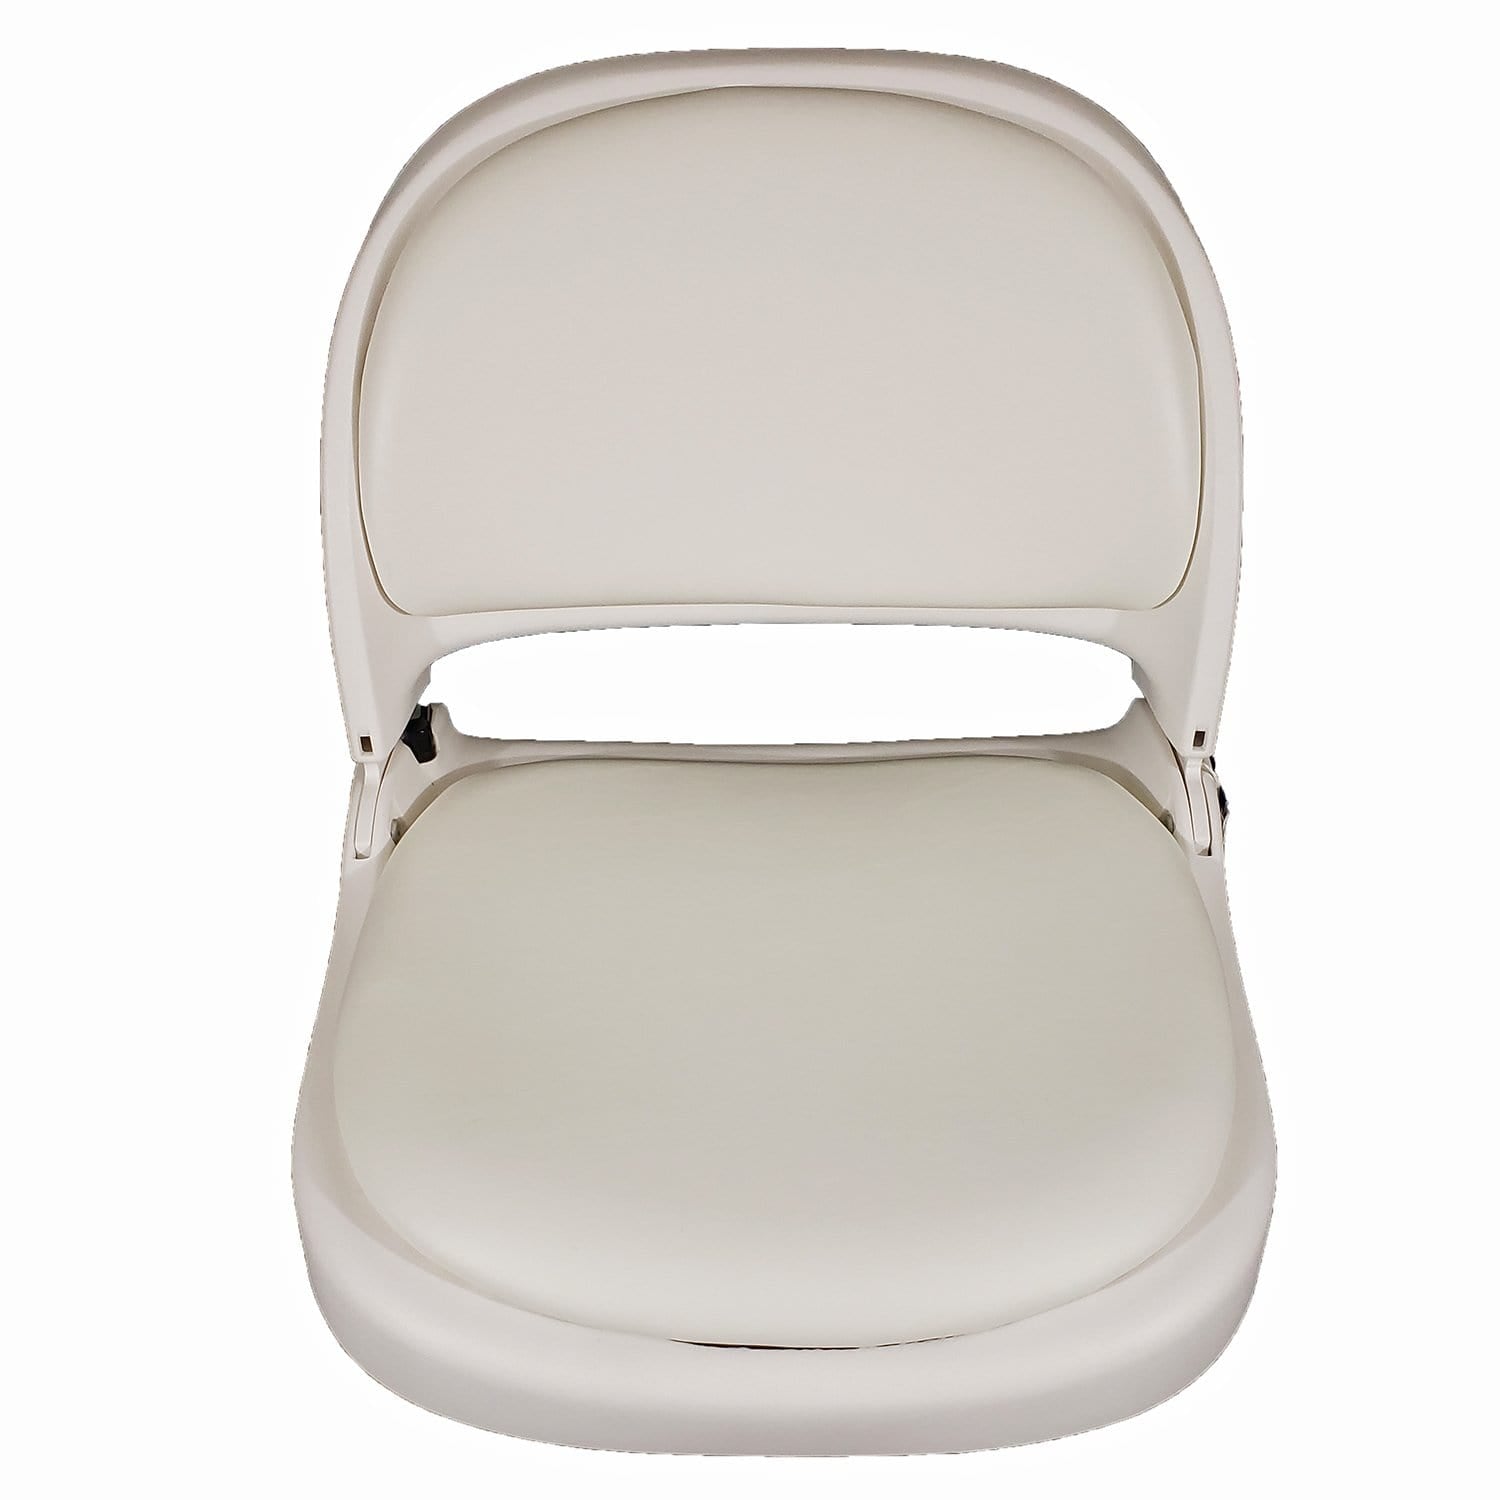 Attwood 7012-101-4 White Pro-Form Seat